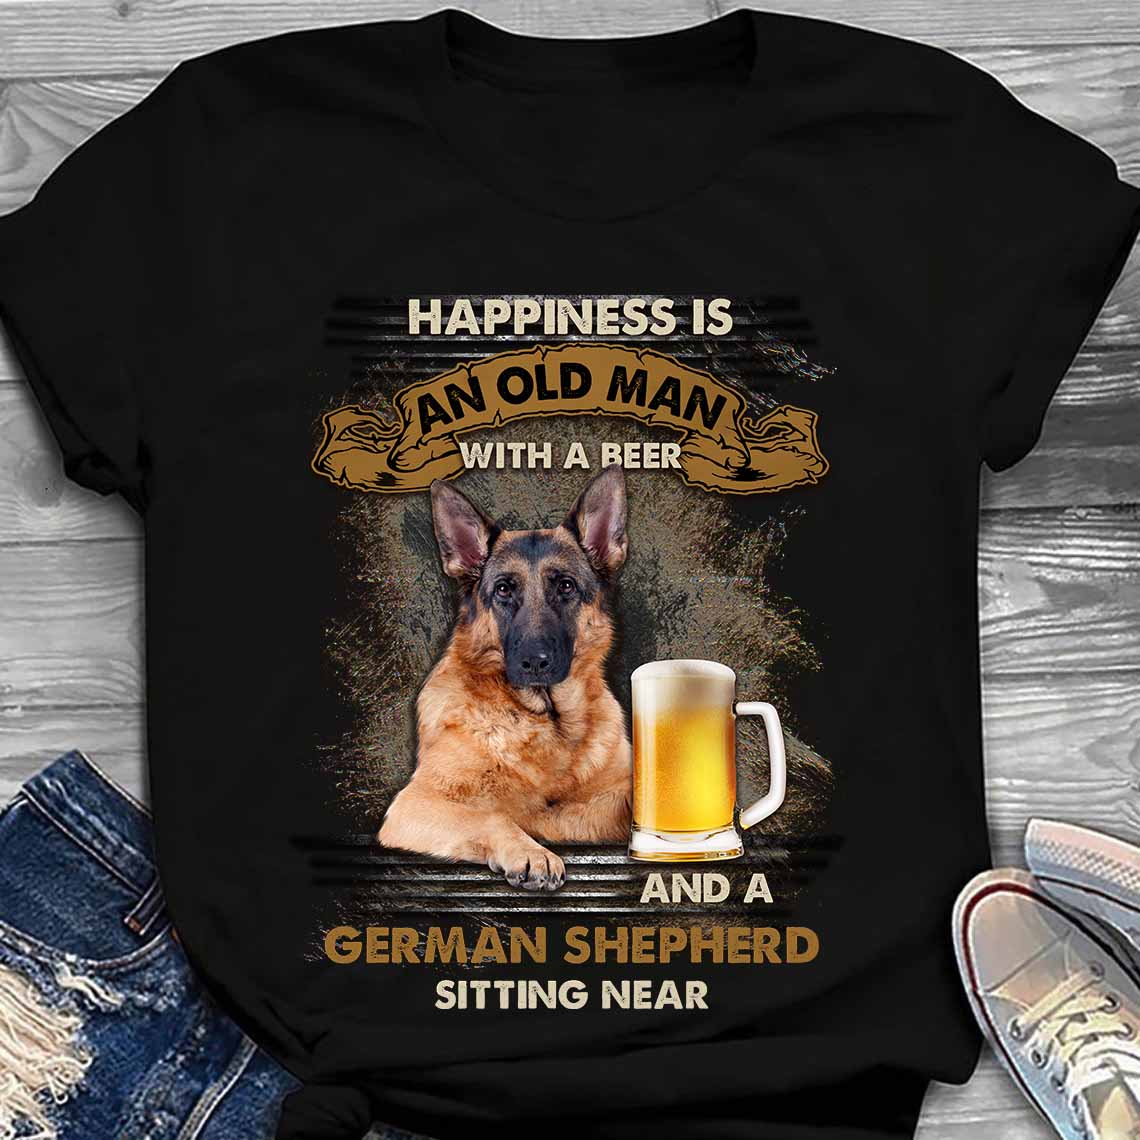 Happiness is an old man with a beer and a german shepherd sitting near - Beer lover, dog lover